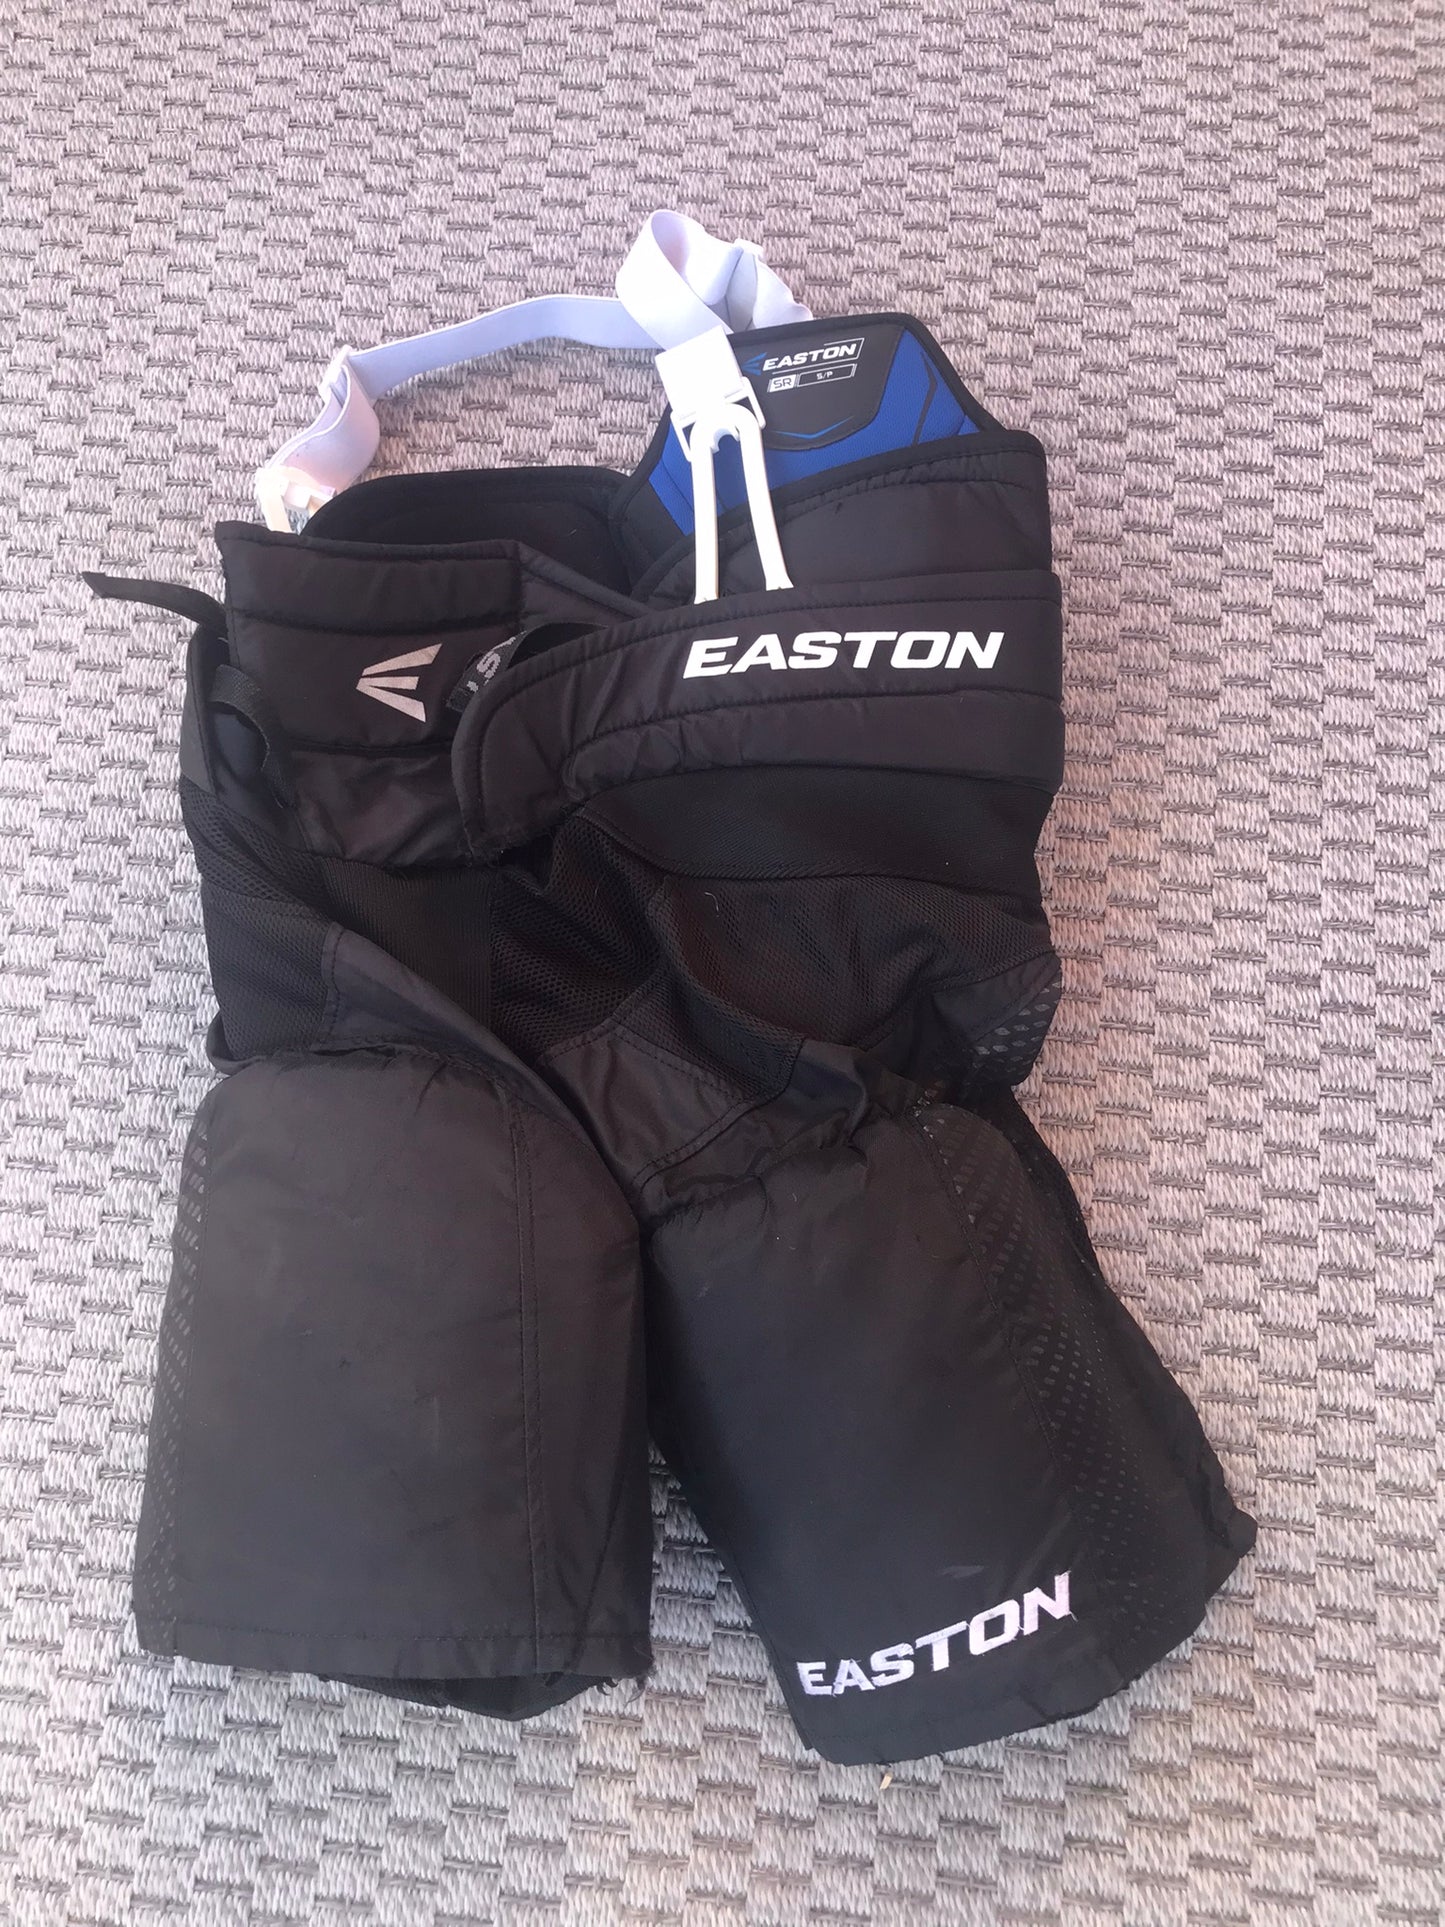 Hockey Pants Men's Size Small Easton With Suspenders Black Blue Excellent